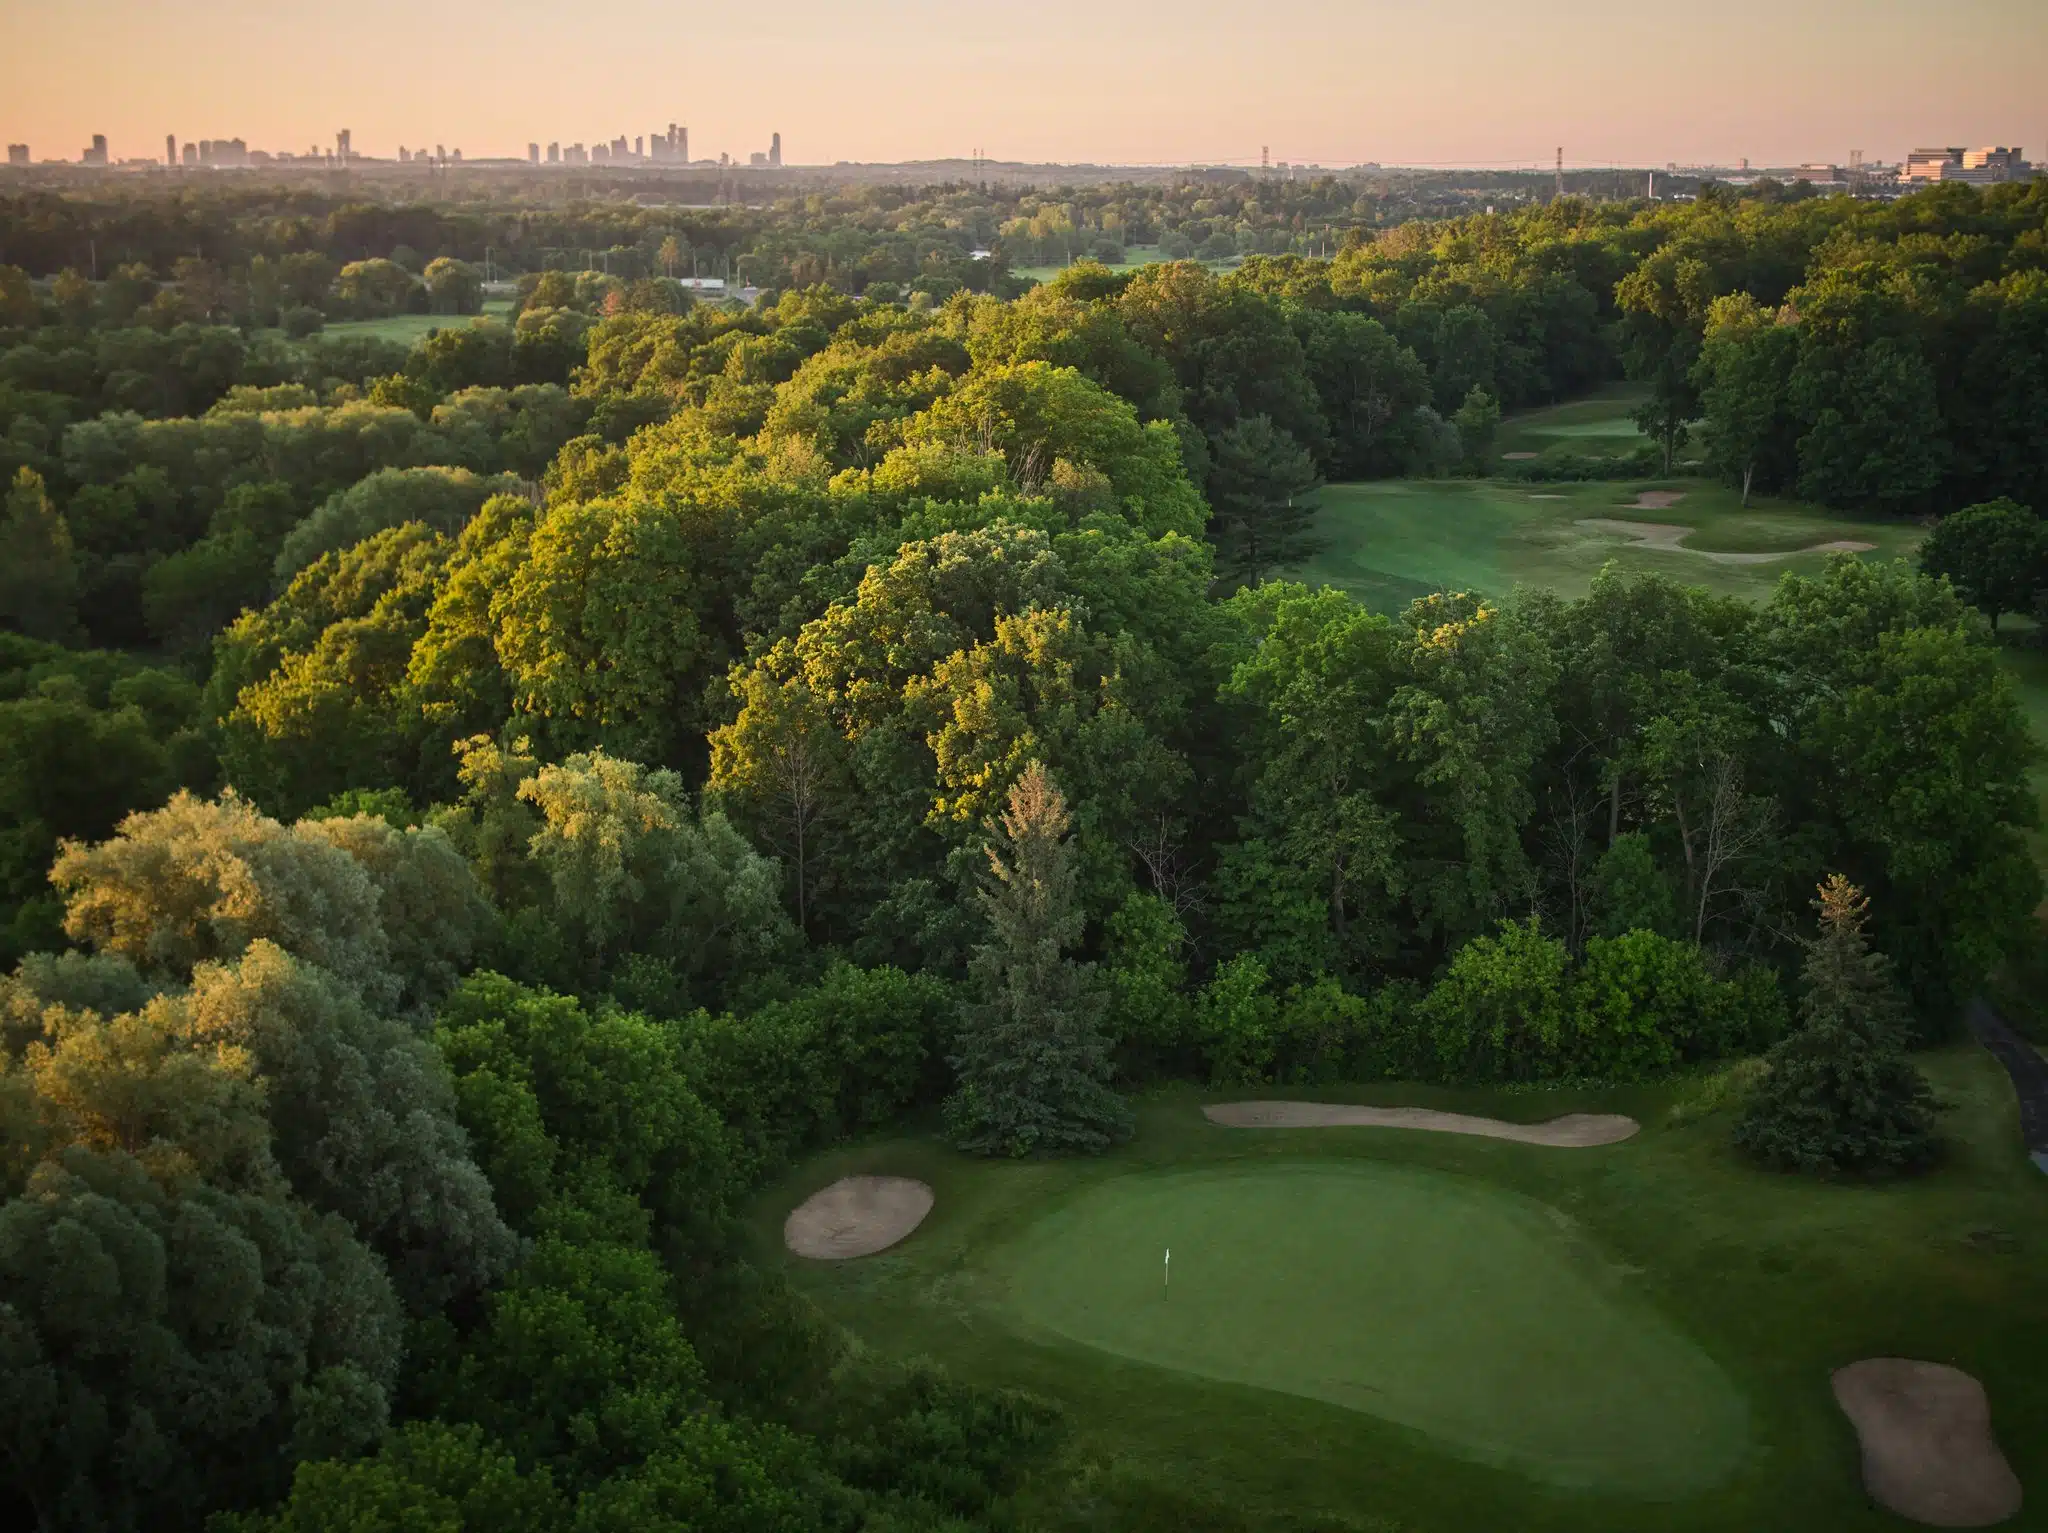 Aerial image of golf course, with city scape far in the distance.